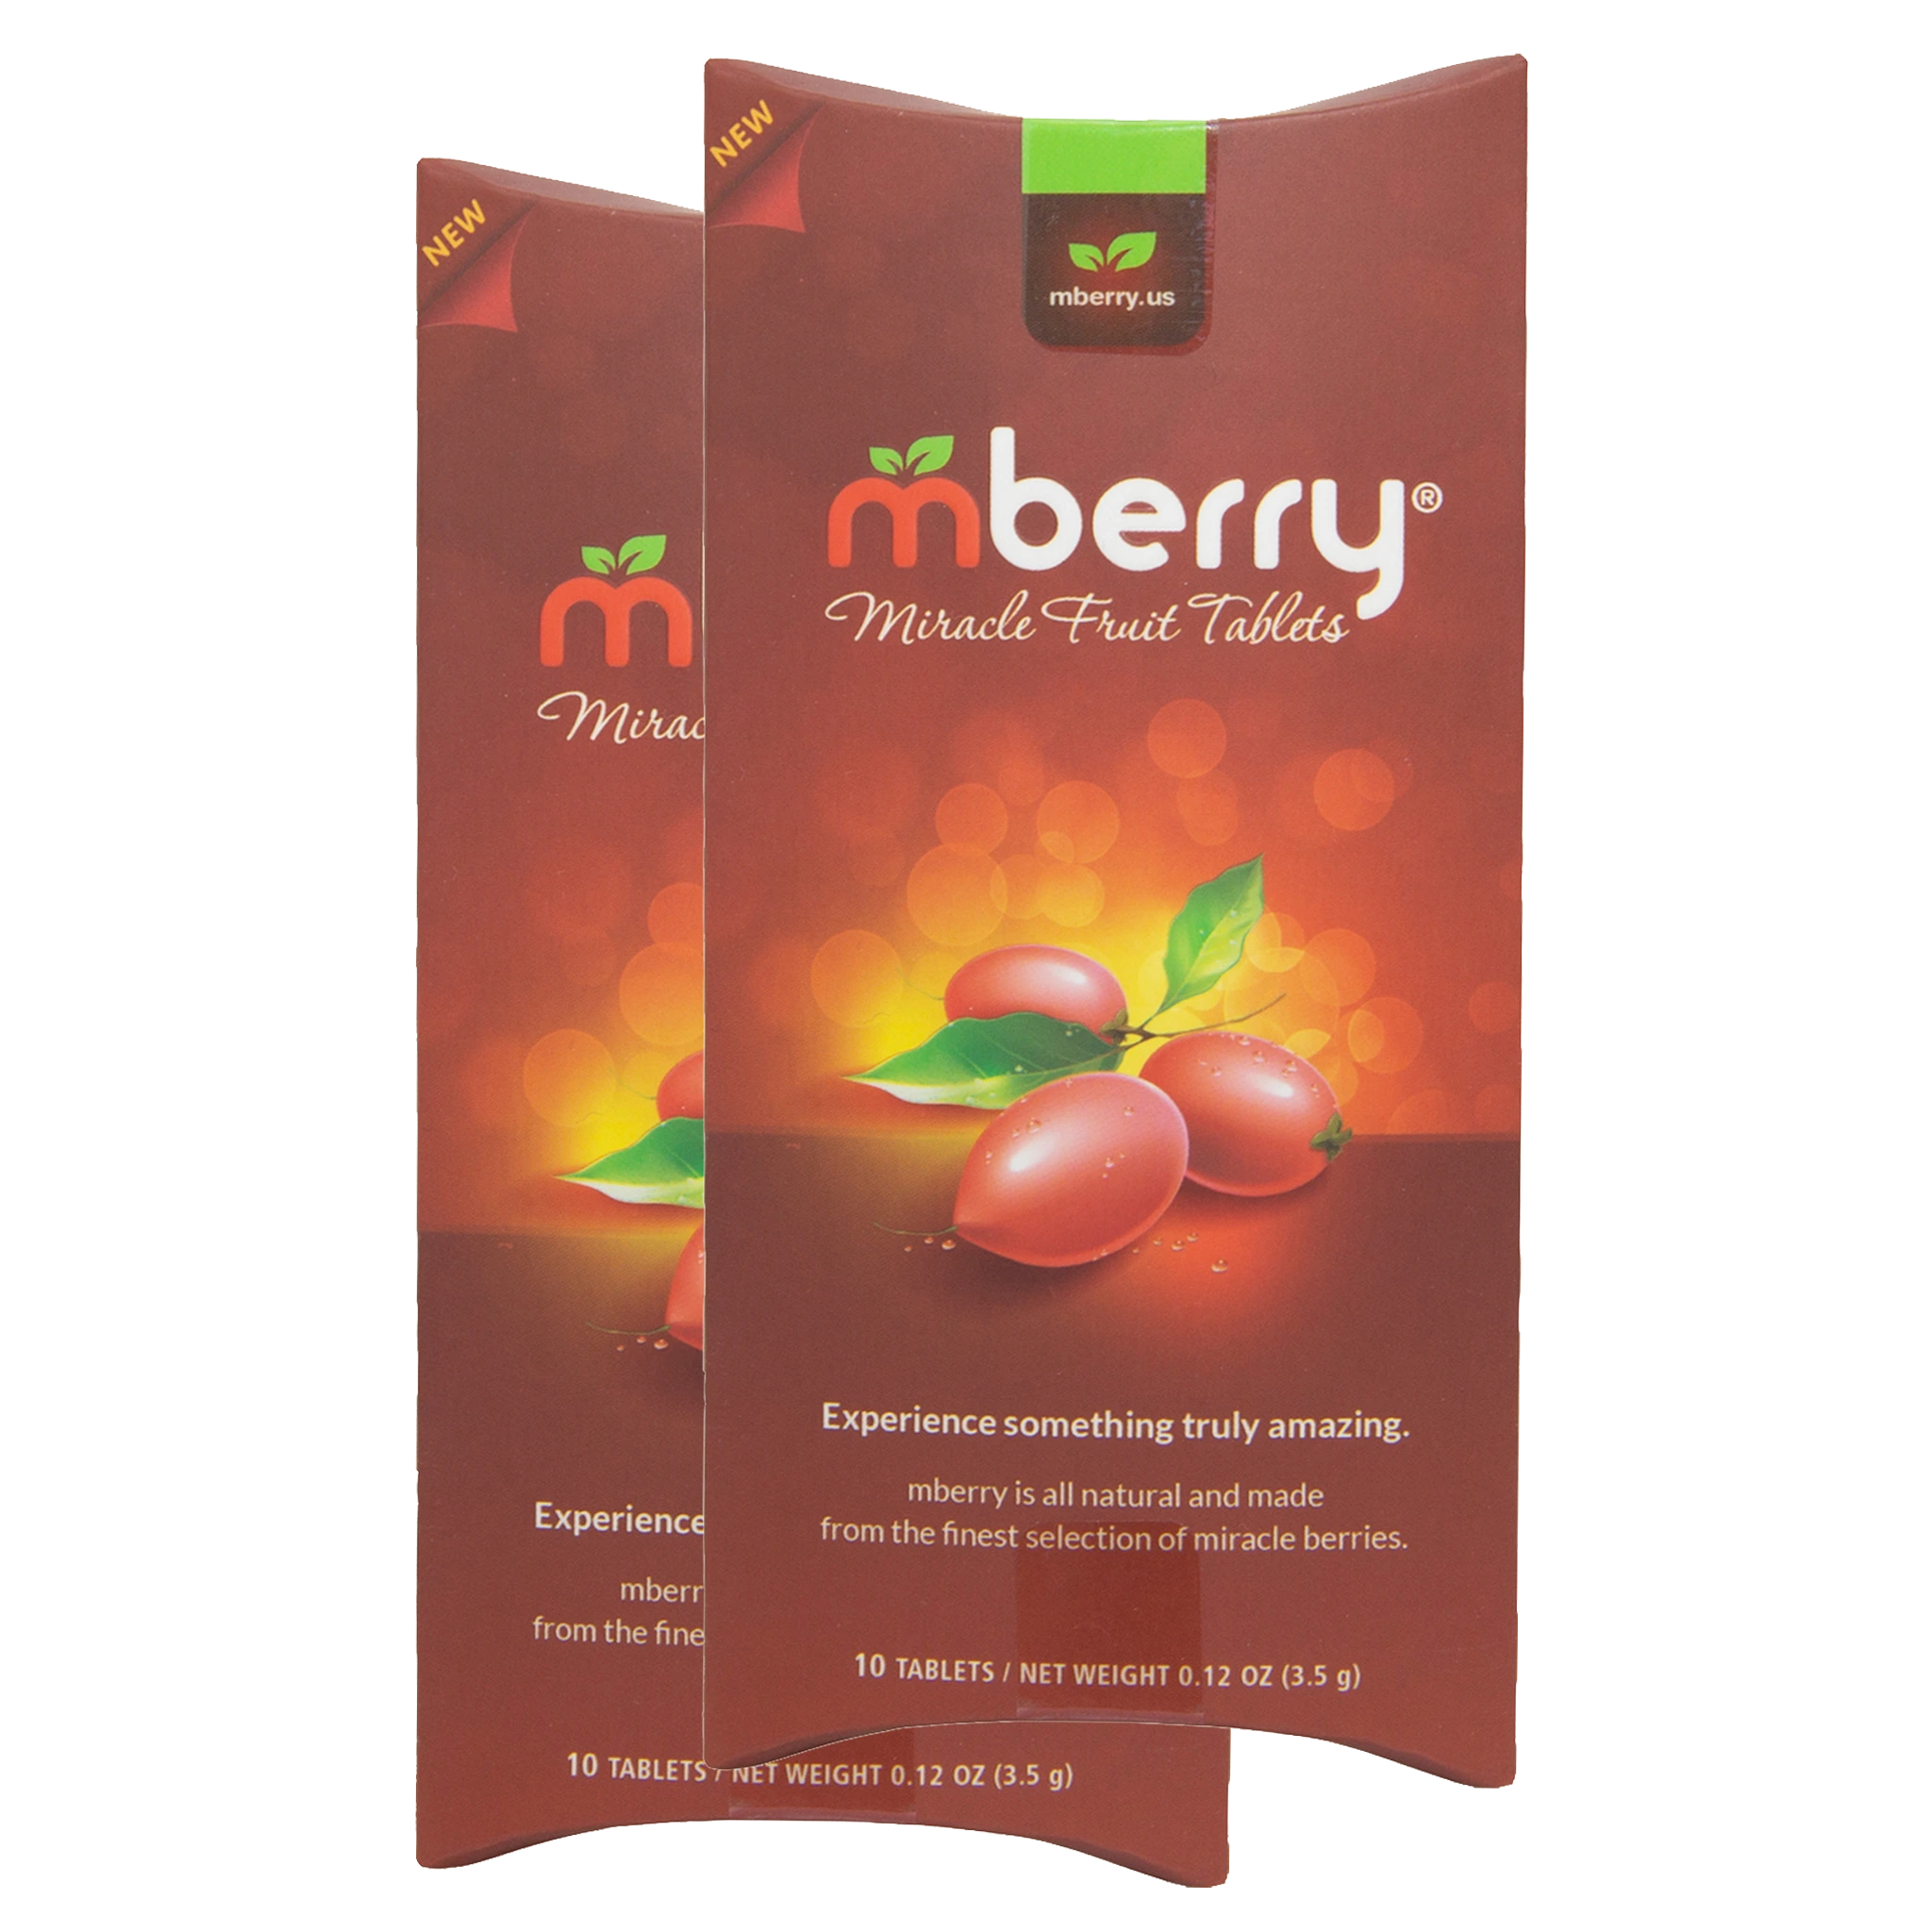 Mberry Miracle fruit tablets has a red packaging with the mberry logo, 3 berries and 2 green leaves. There are 2 packages